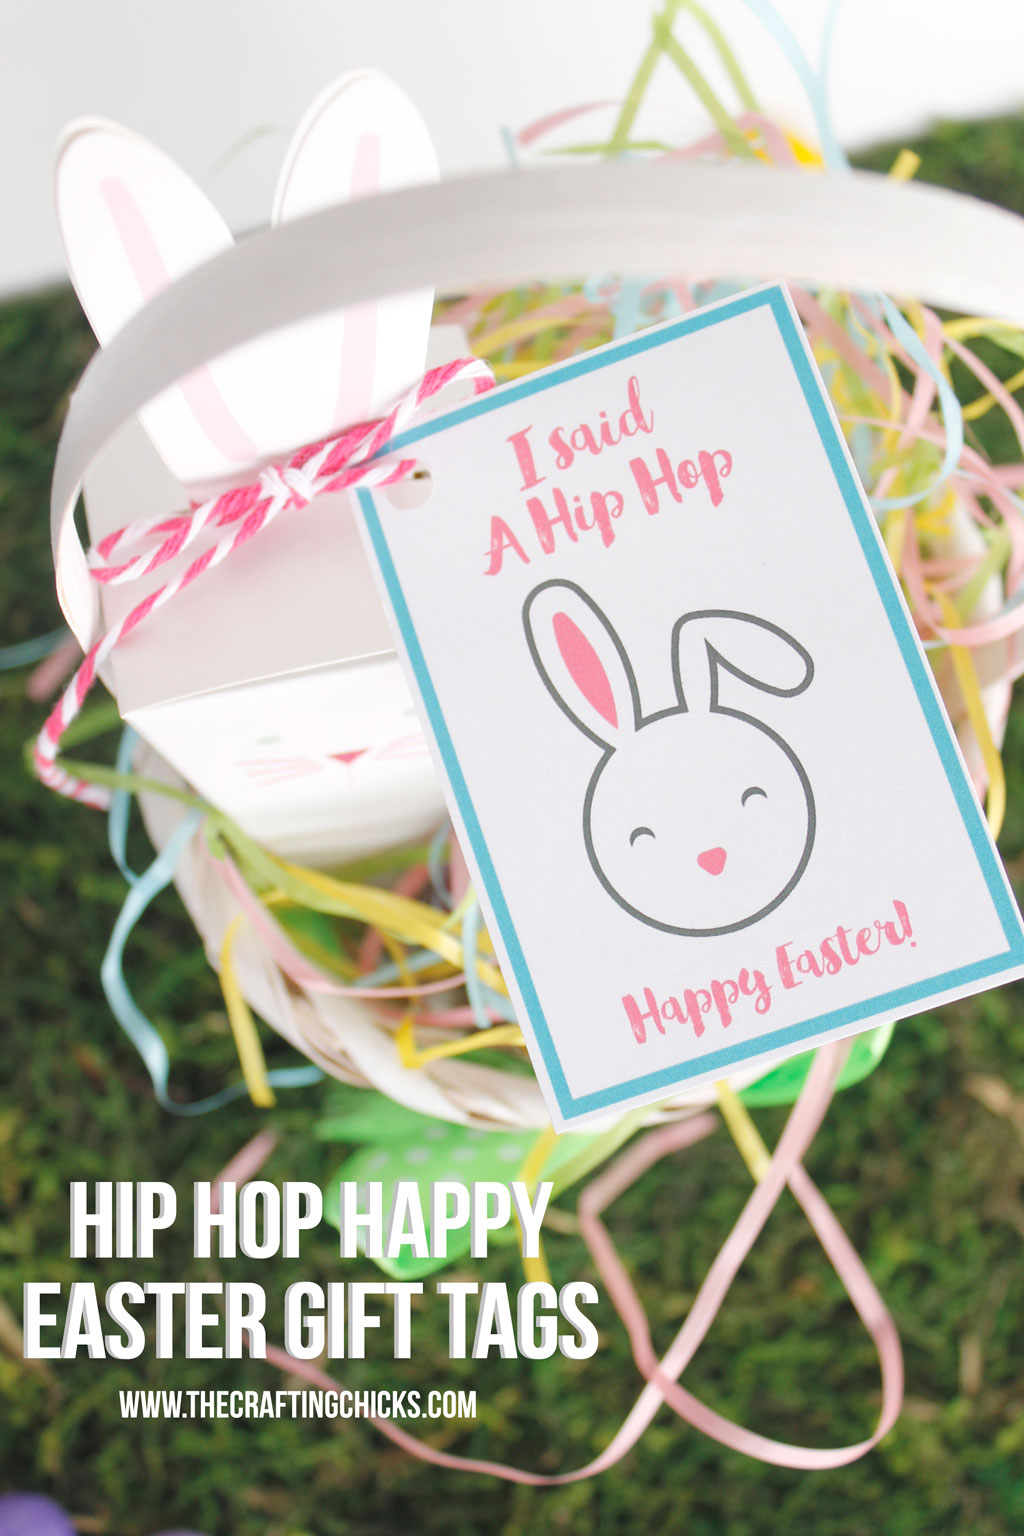 Hip Hop Happy Easter Gift Tags